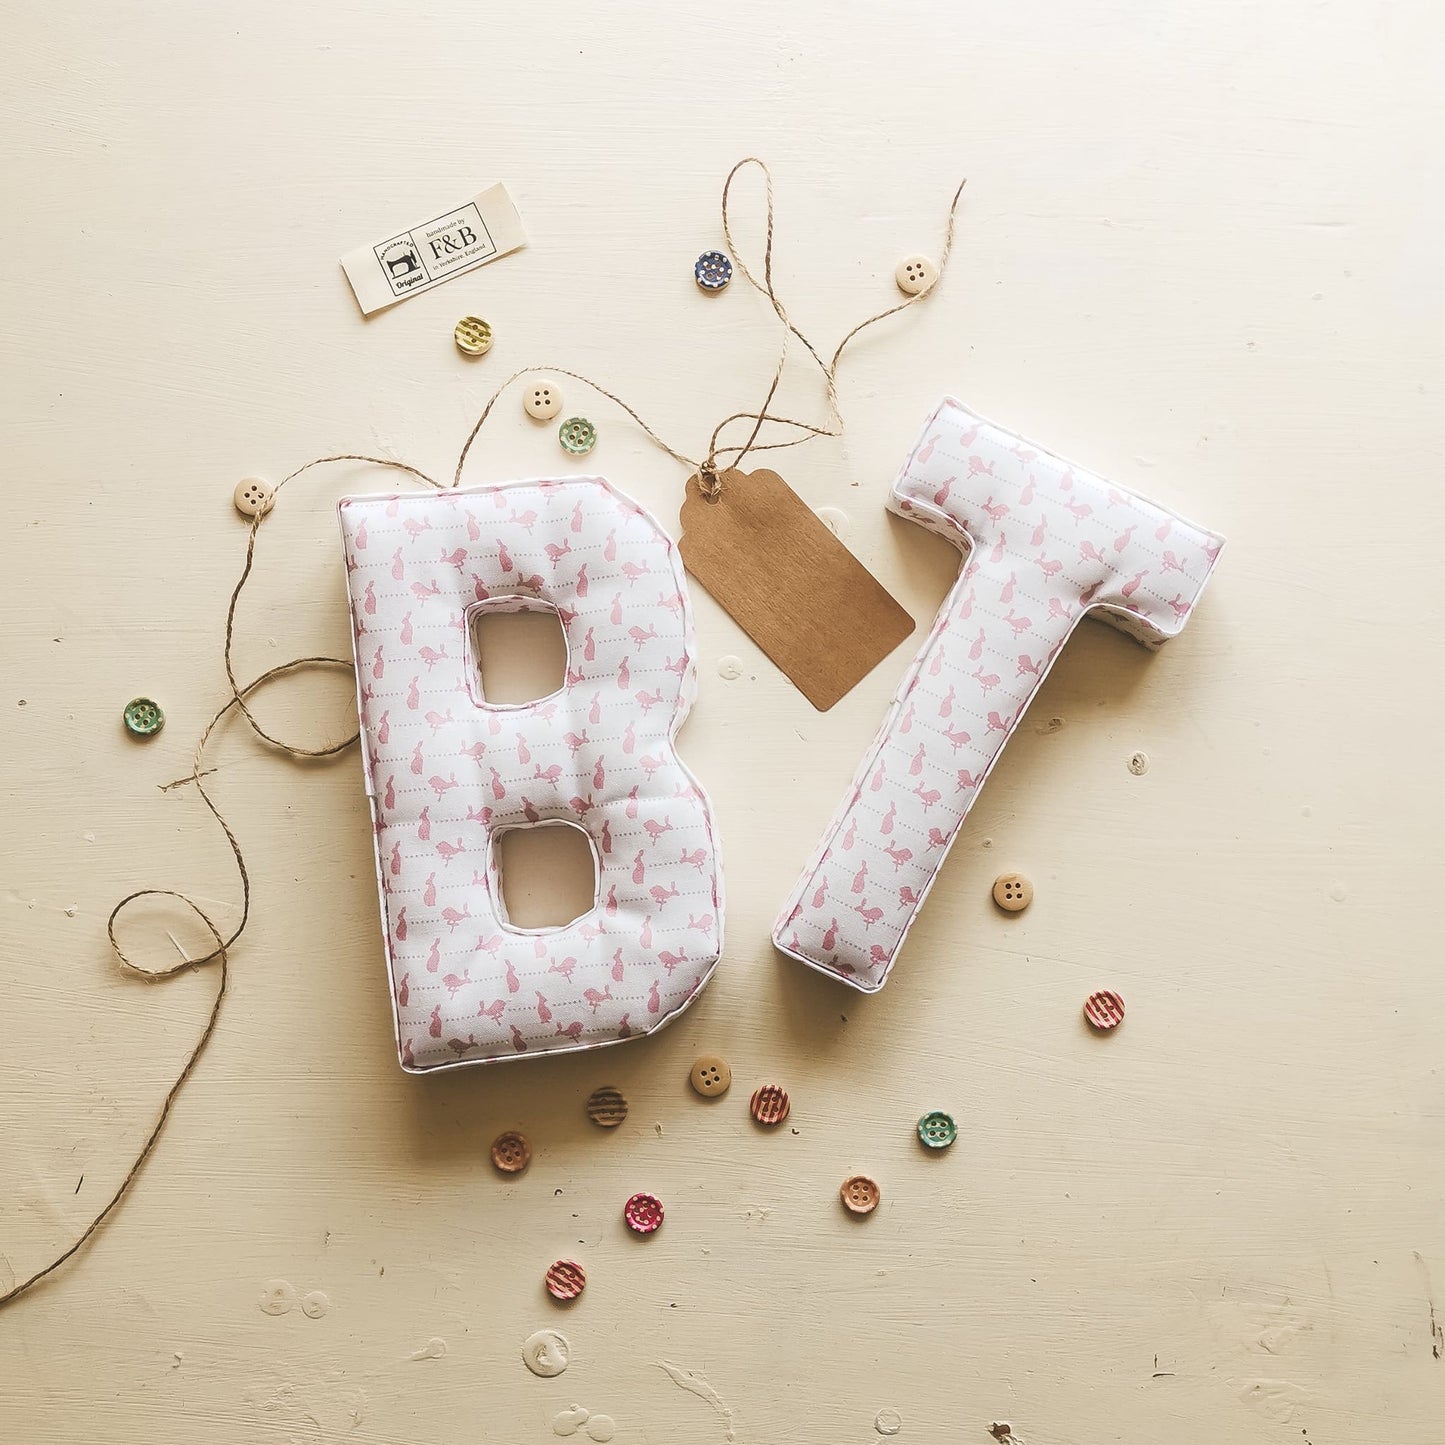 B T - Fabric Initials for the alphabet - handmade by F&B in dainty country prints featuring hares and other cute country designs